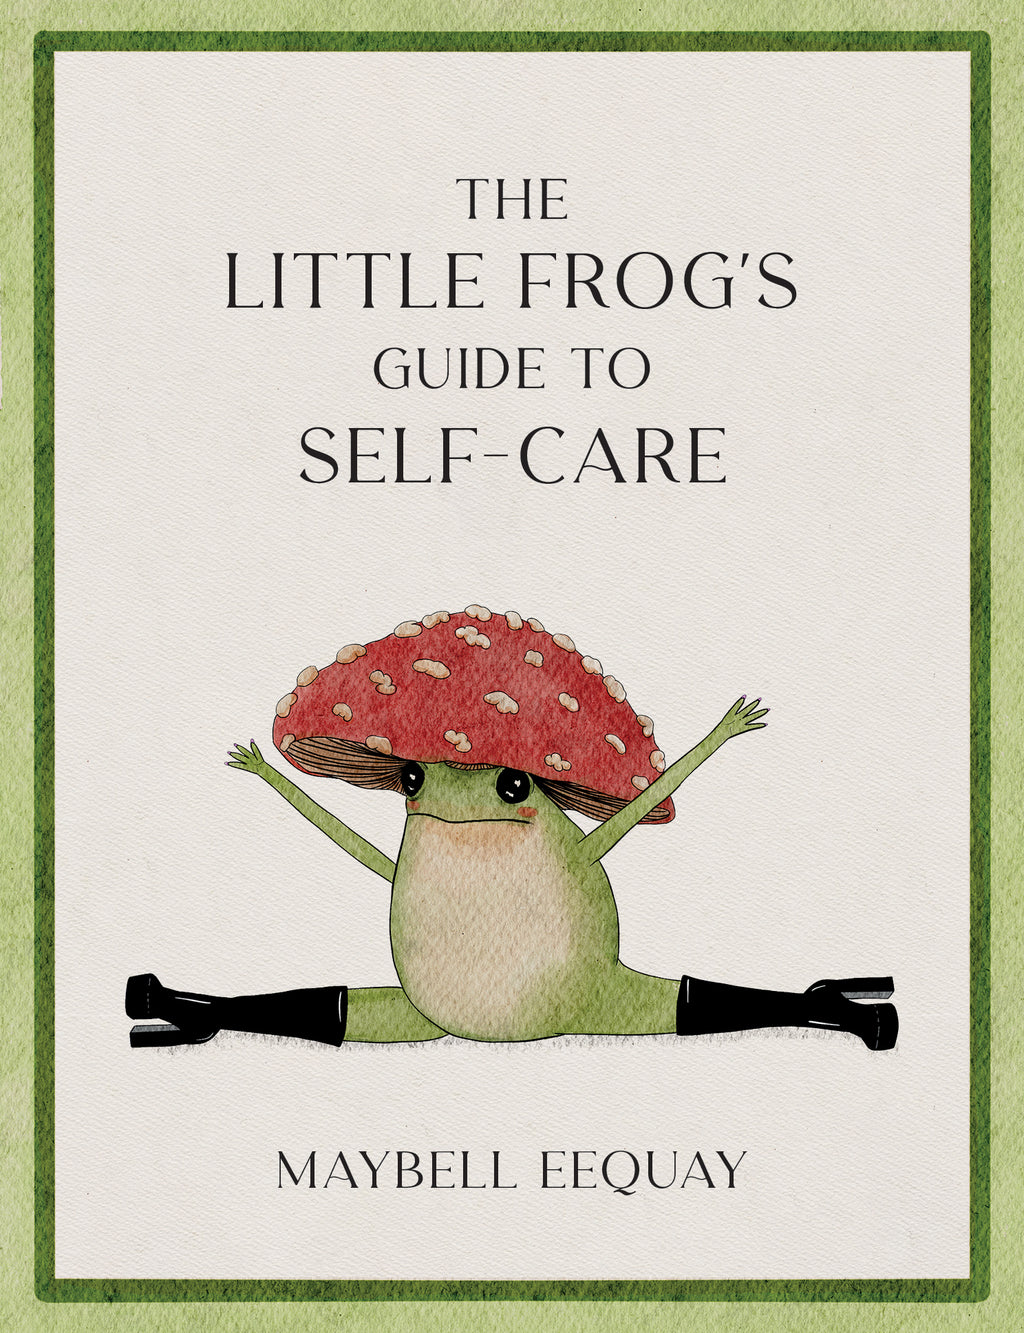 Little frogs guide to self care